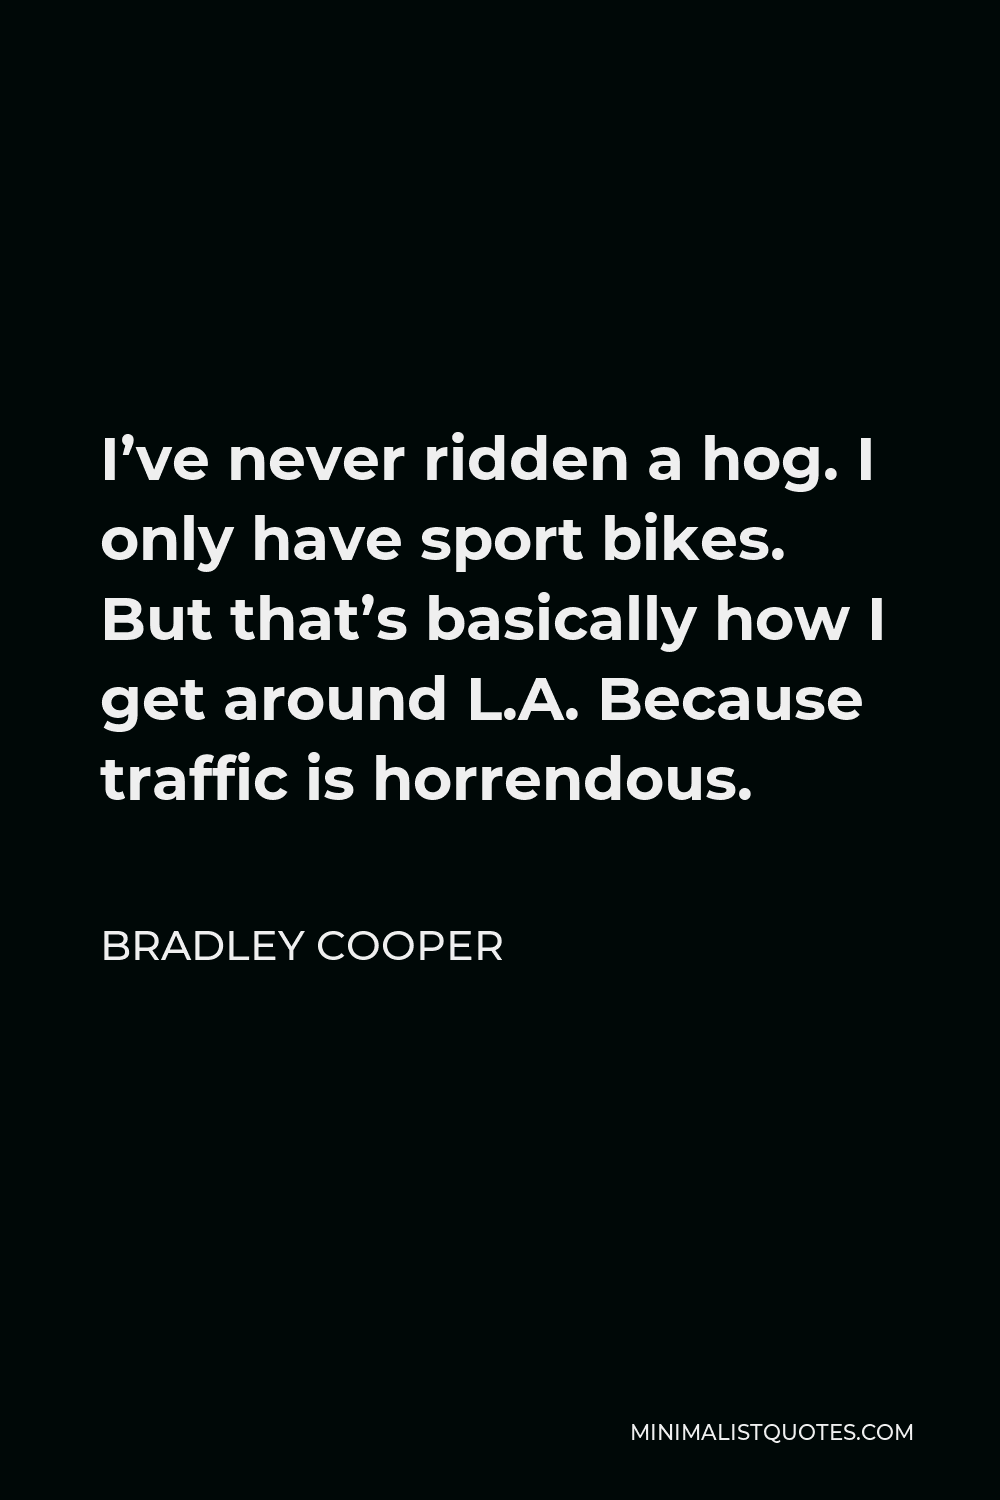 Bradley Cooper Quote - I’ve never ridden a hog. I only have sport bikes. But that’s basically how I get around L.A. Because traffic is horrendous.